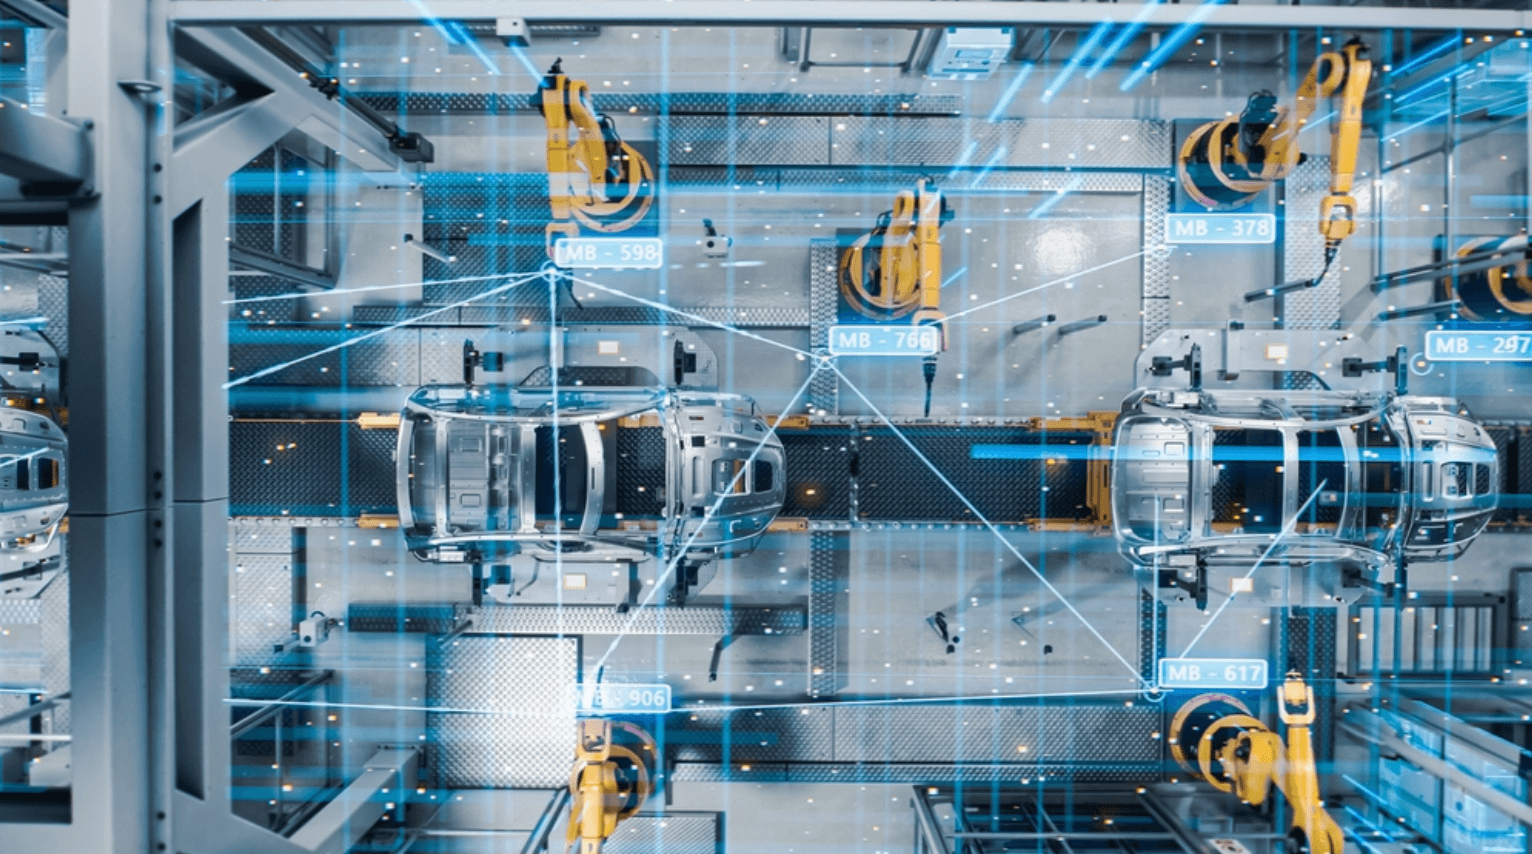 Computer Vision is Revolutionizing the Manufacturing Supply Chain